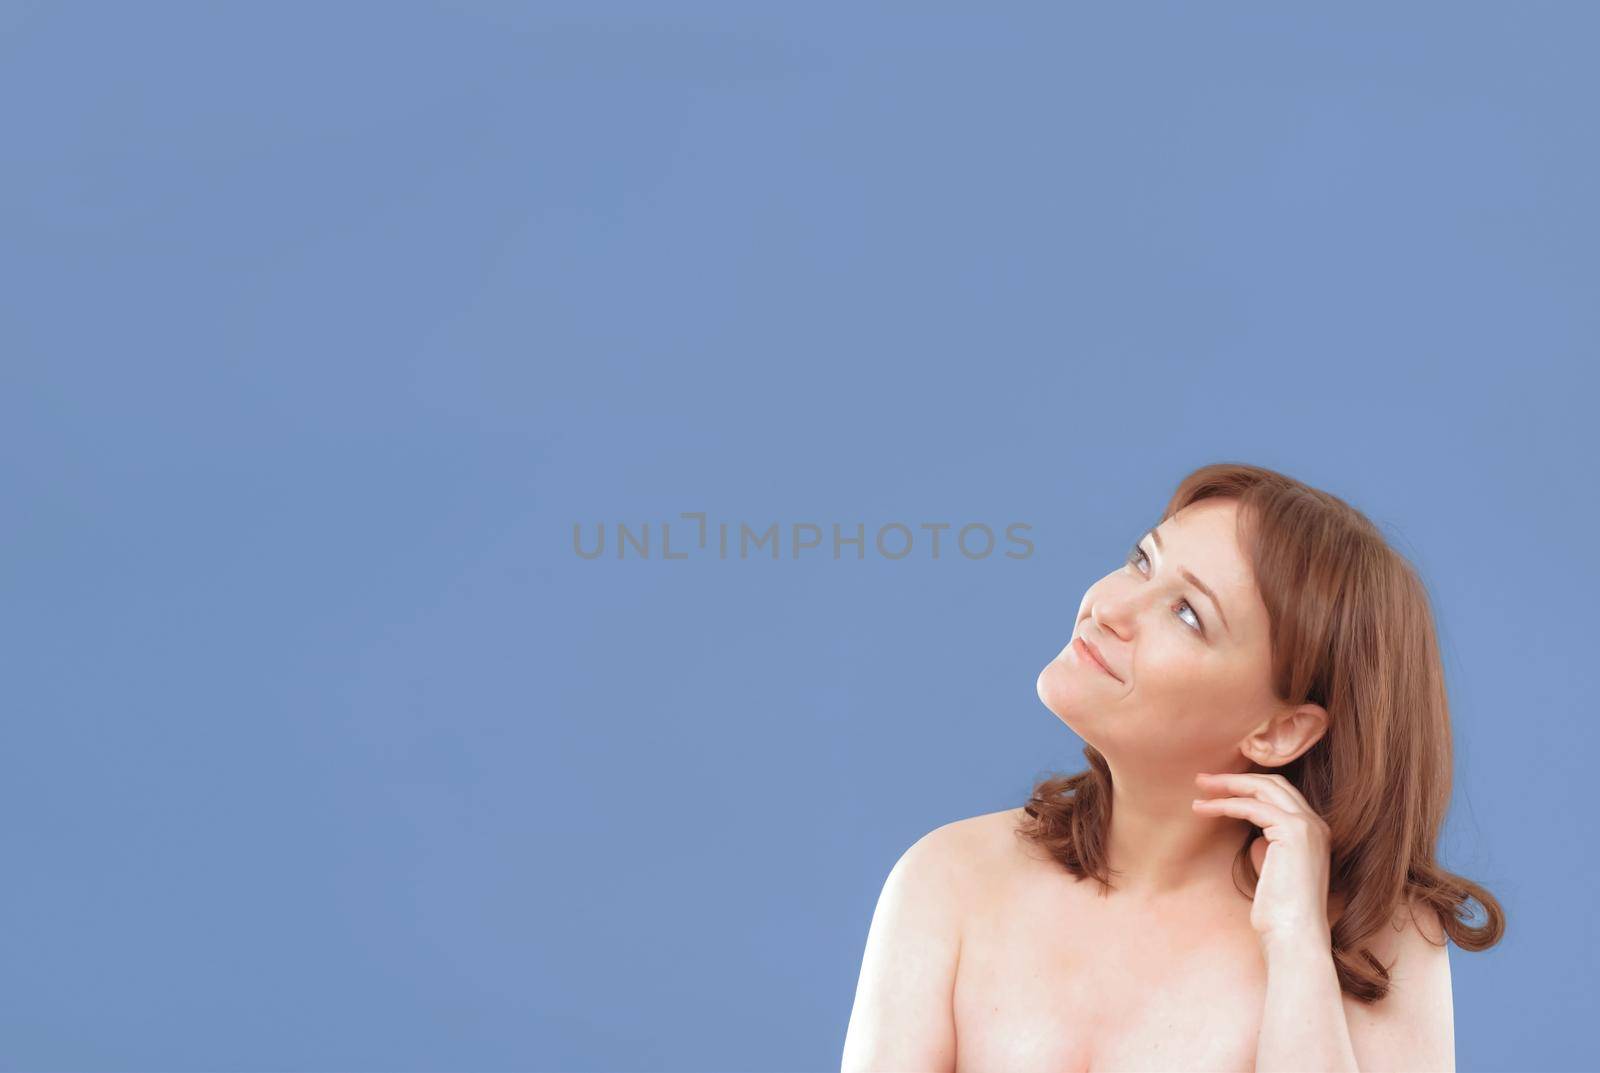 Naked woman applying anti-age cream on her skin isolated on color background. Pretty mature female applies skin care product by touching face with hand. Close up. Spa and wellness concept. Template by LipikStockMedia